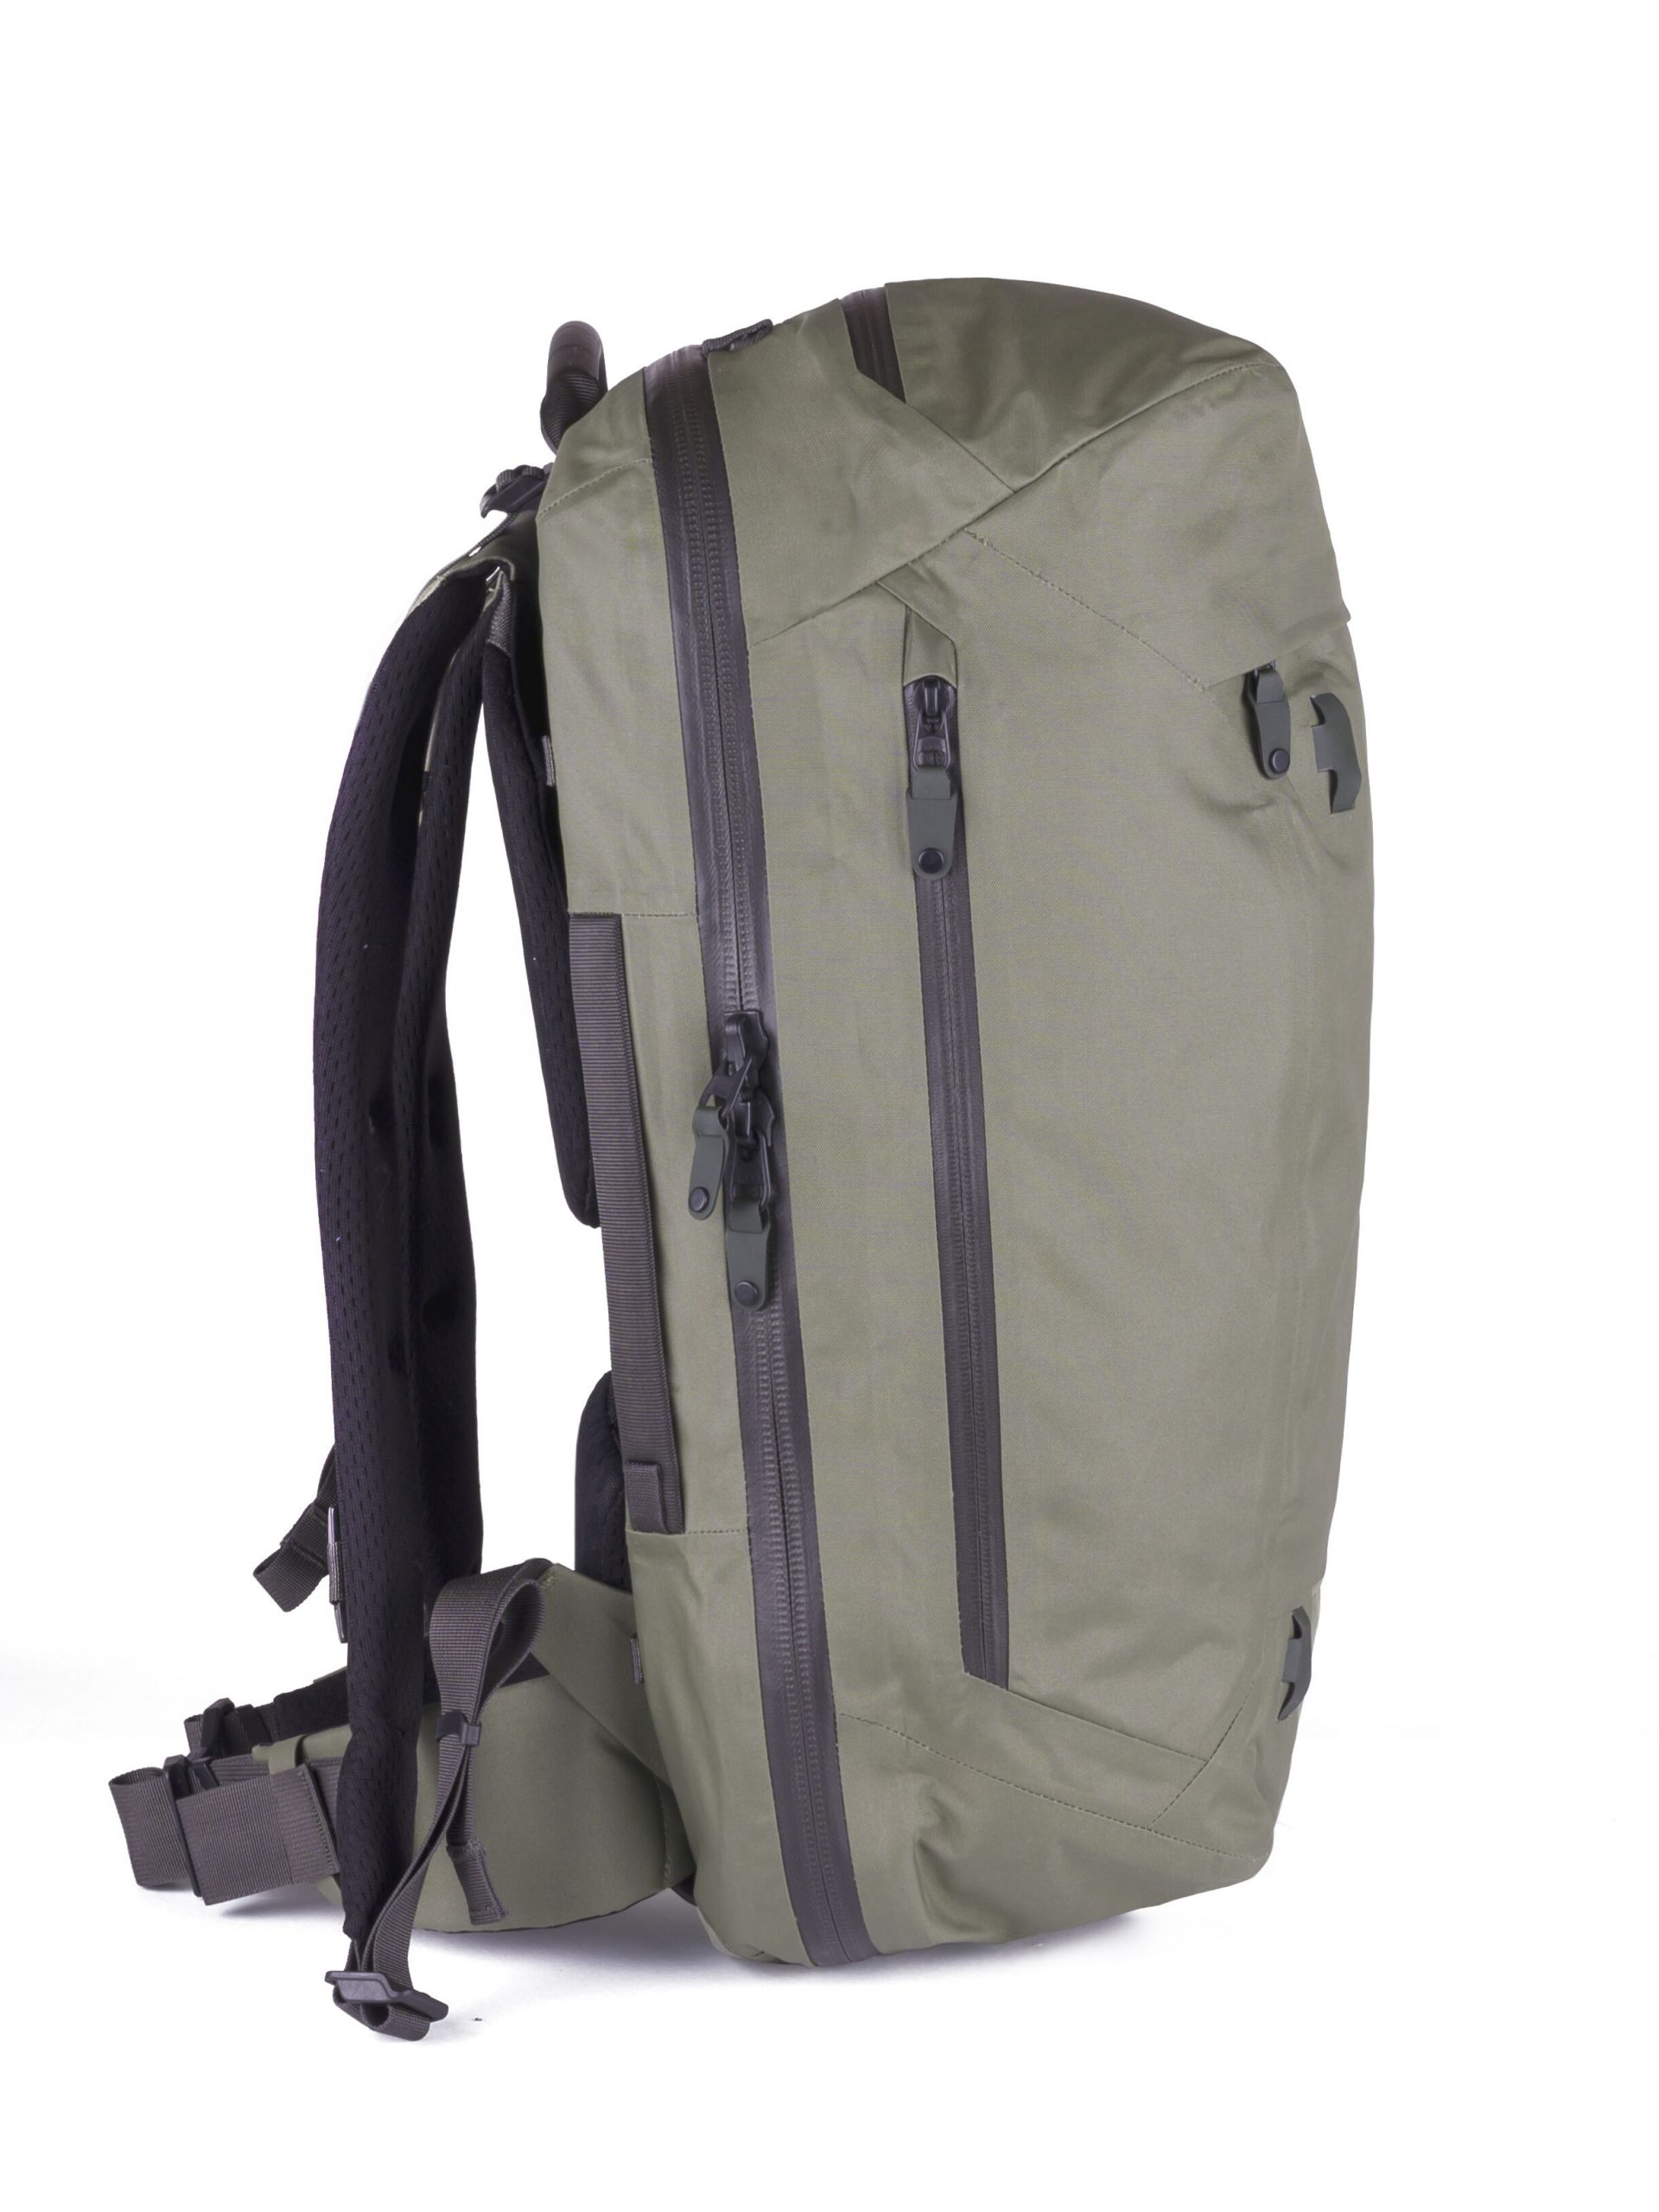 Boundary Supply Arris Adventure Travel Pack | The Coolector